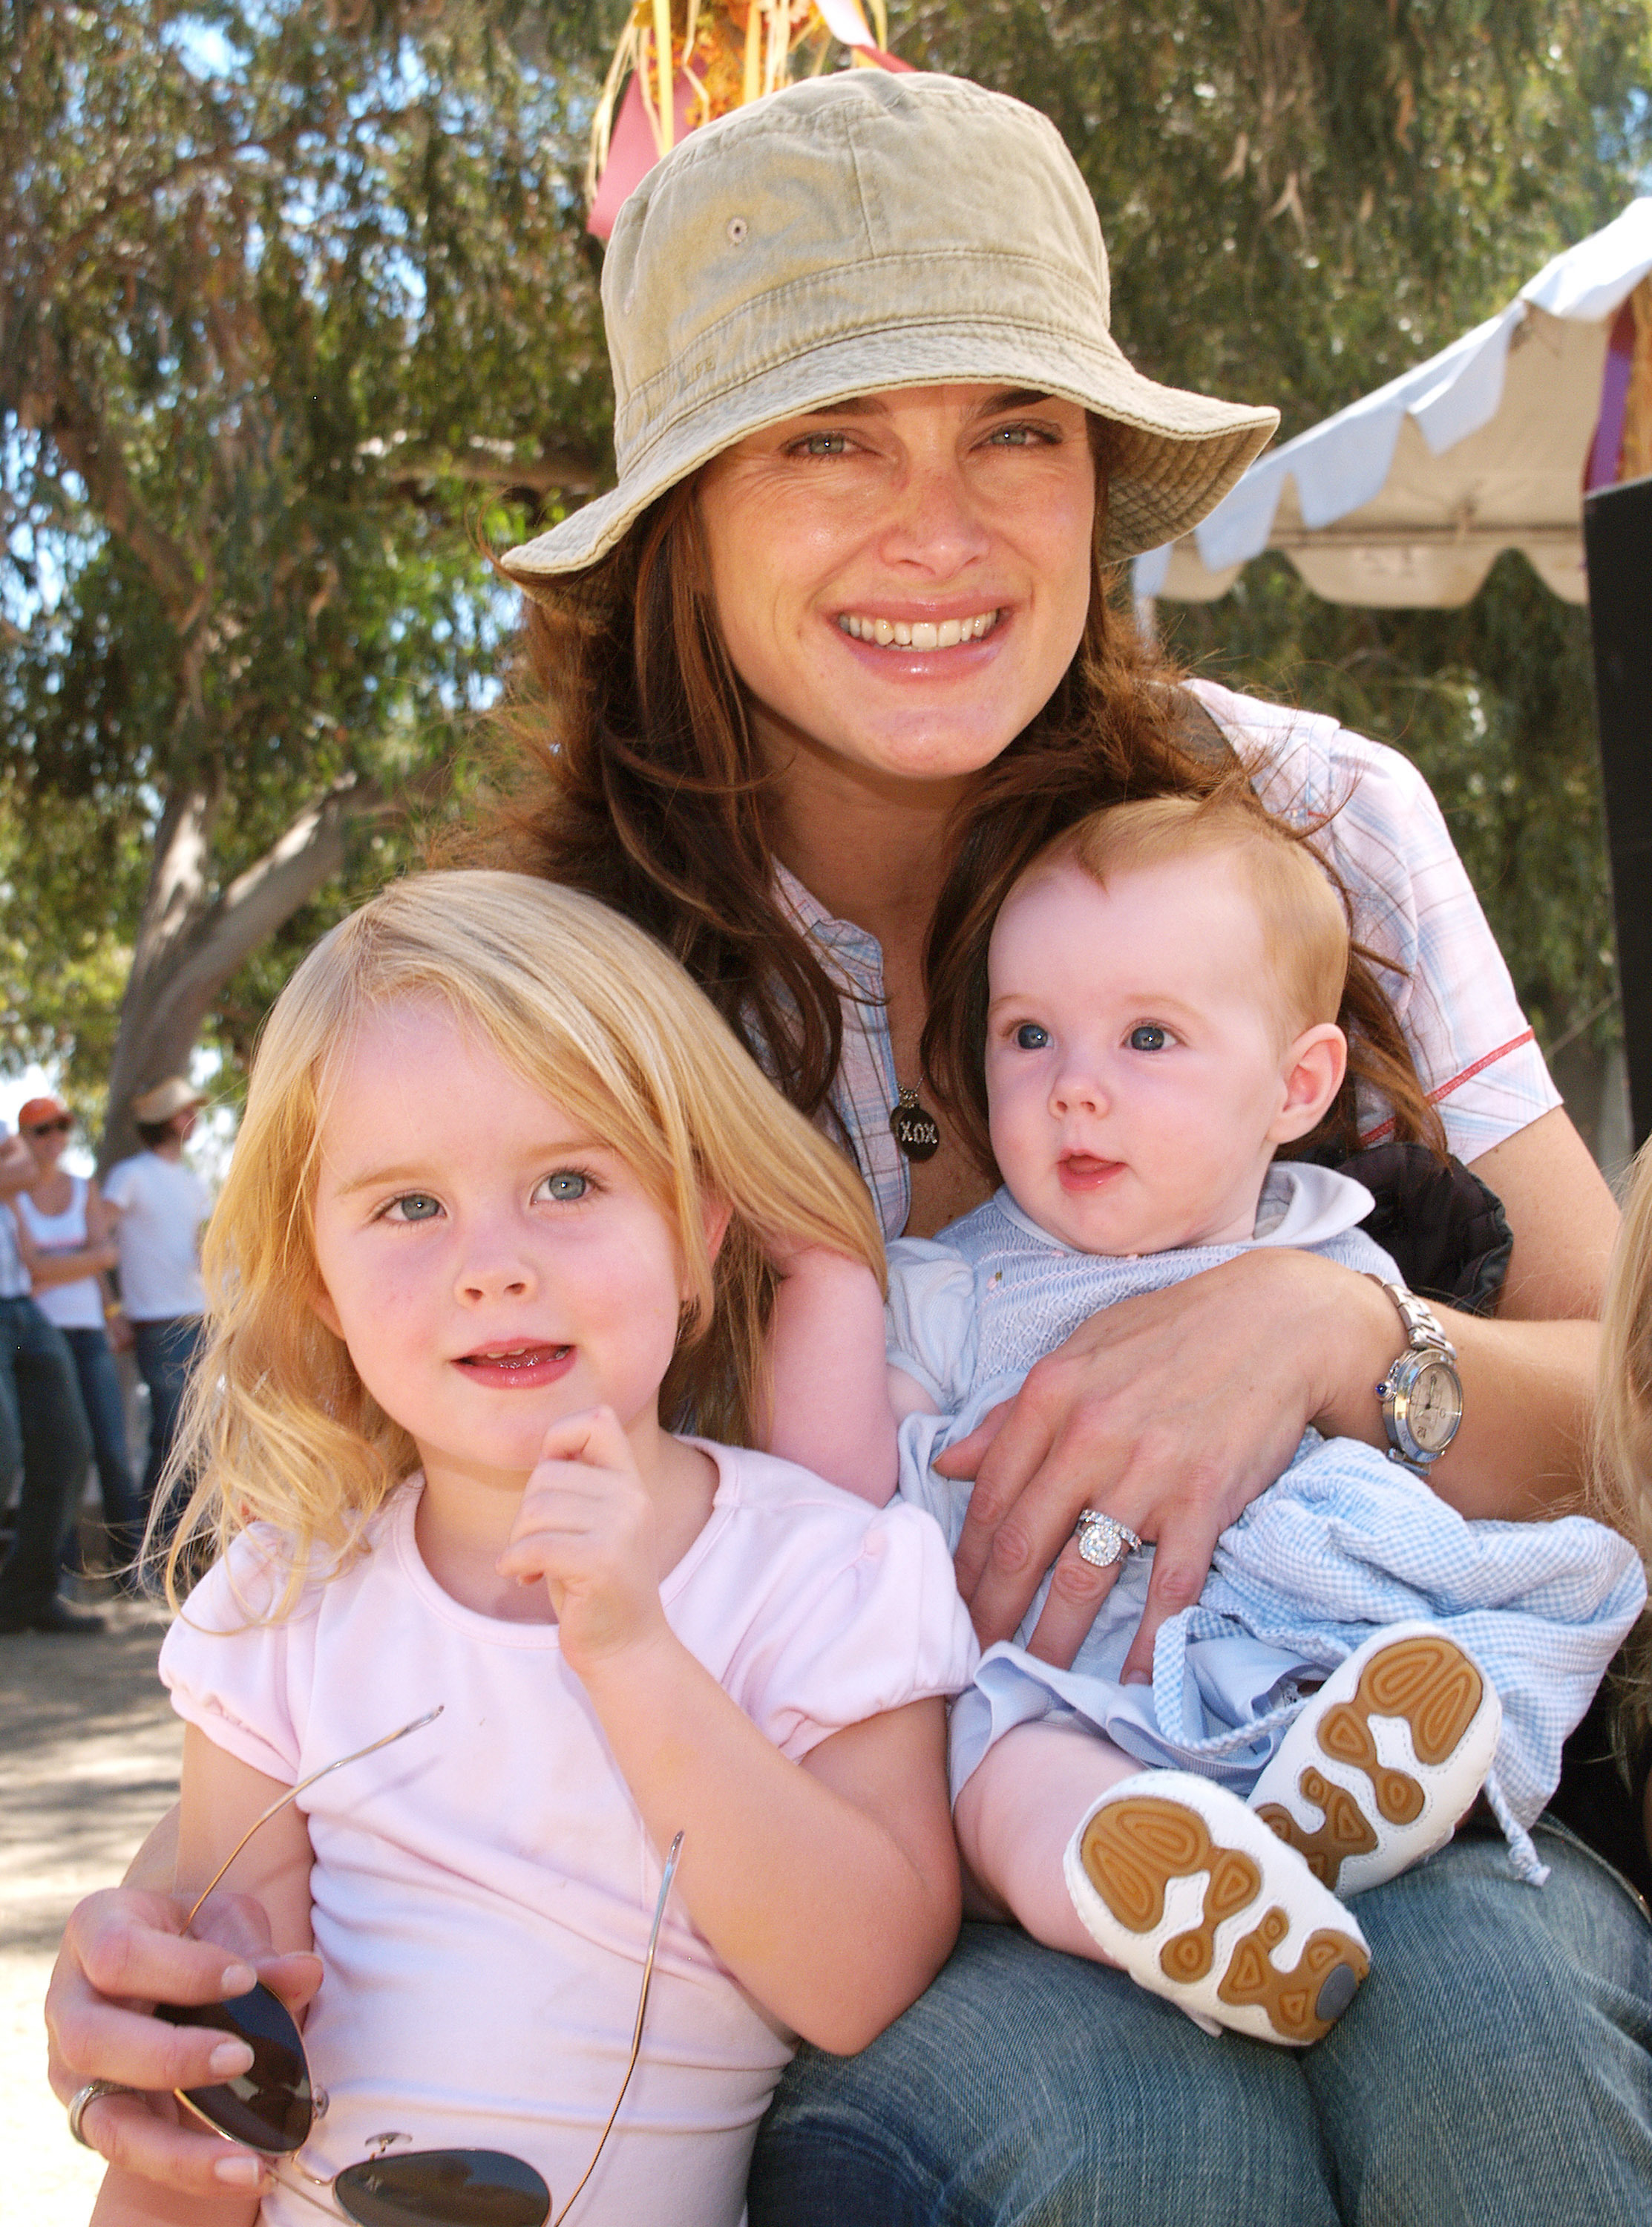 <p><a href="https://www.wonderwall.com/celebrity/profiles/overview/brooke-shields-426.article">Brooke Shields</a> brought her daughters -- then-3-year-old Rowan Henchy and then-5-month-old Grier Henchy -- to the Promises Foundation's First Annual Family Fun Festival and Polo Match in September 2006.</p>